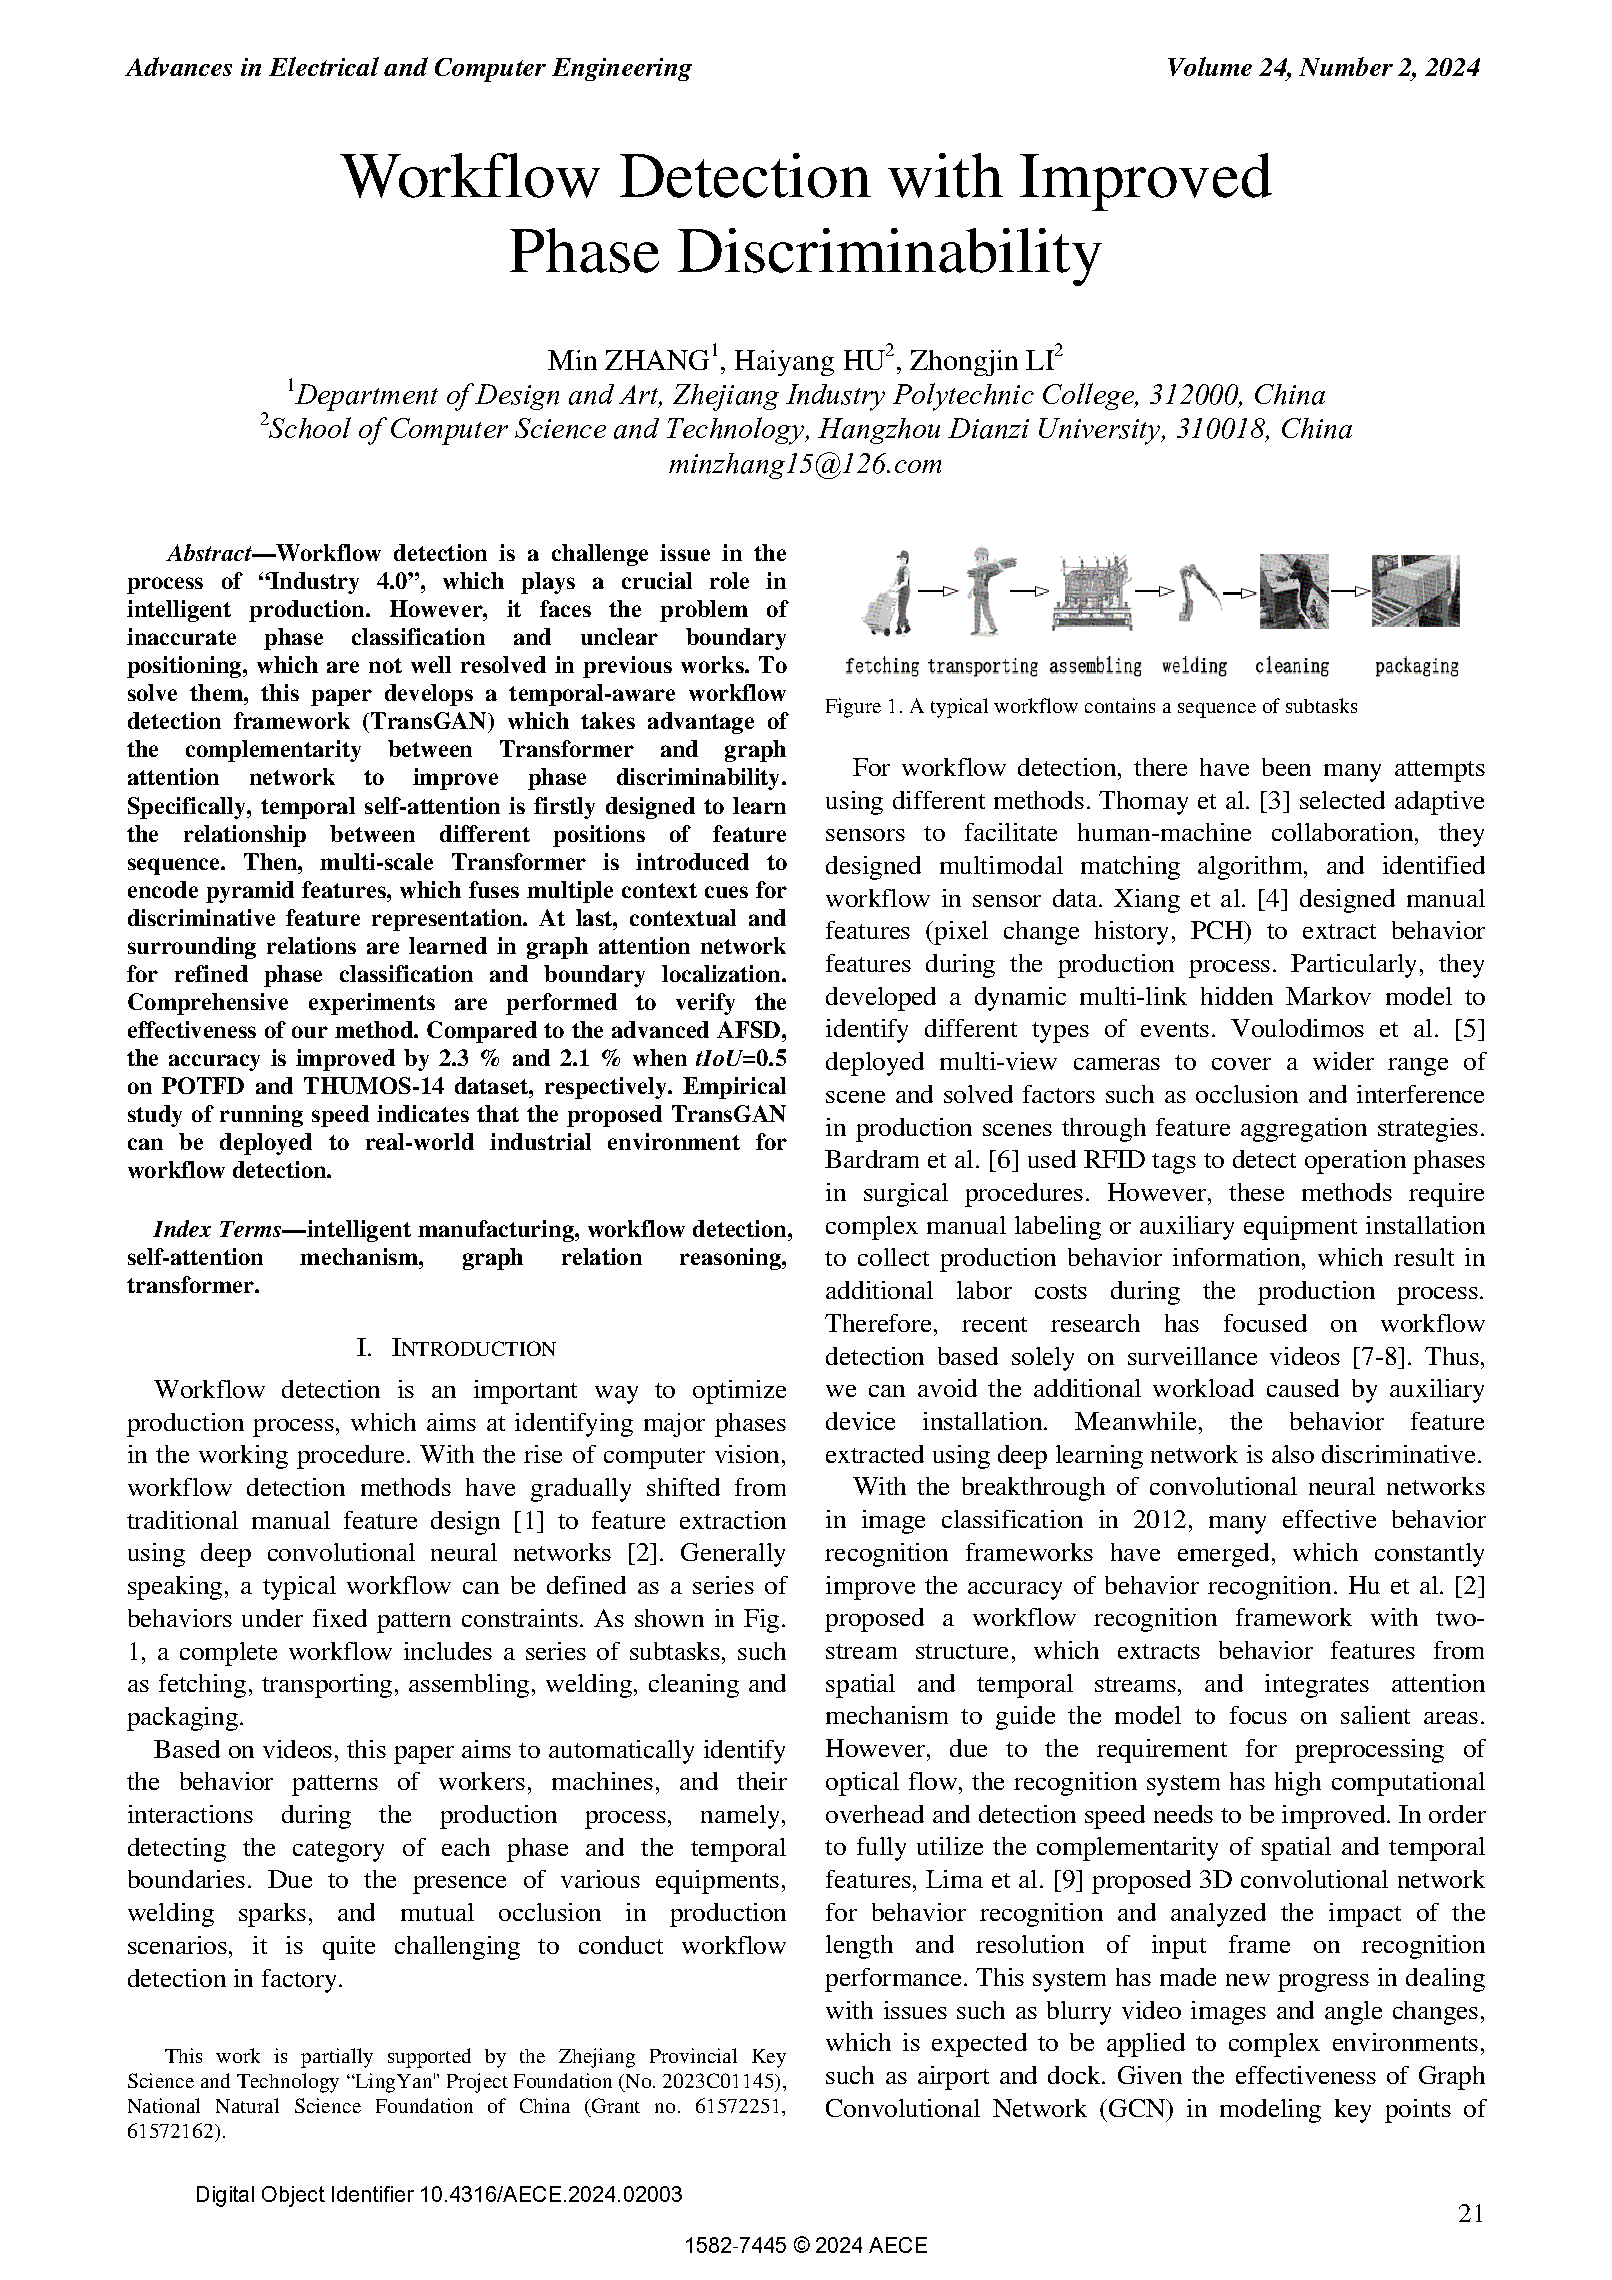 PDF Quickview for paper with DOI:10.4316/AECE.2024.02003